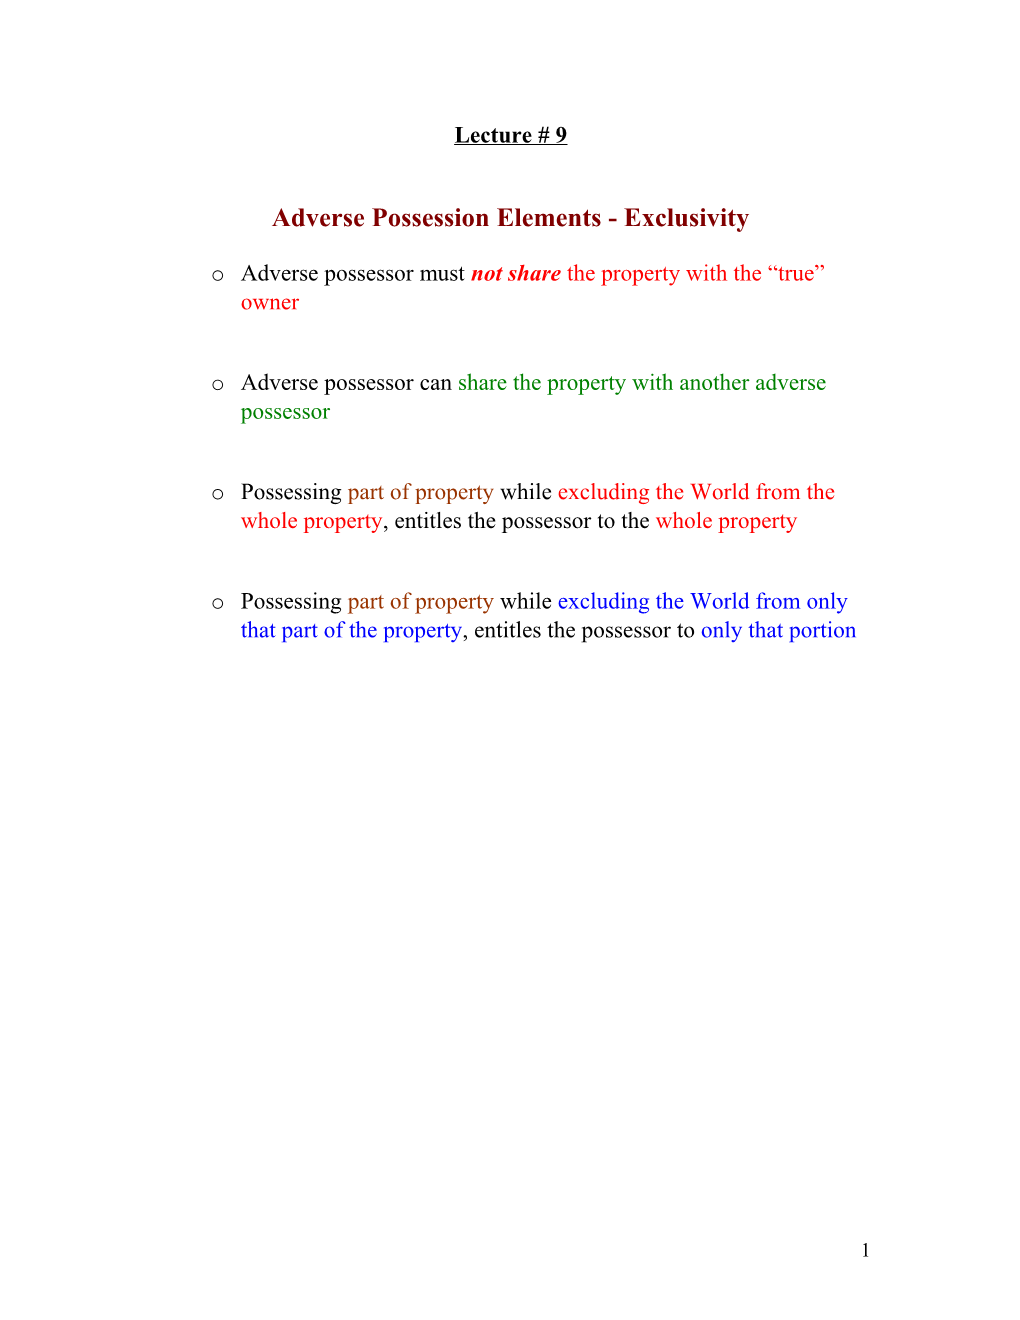 Adverse Possession Elements - Exclusivity